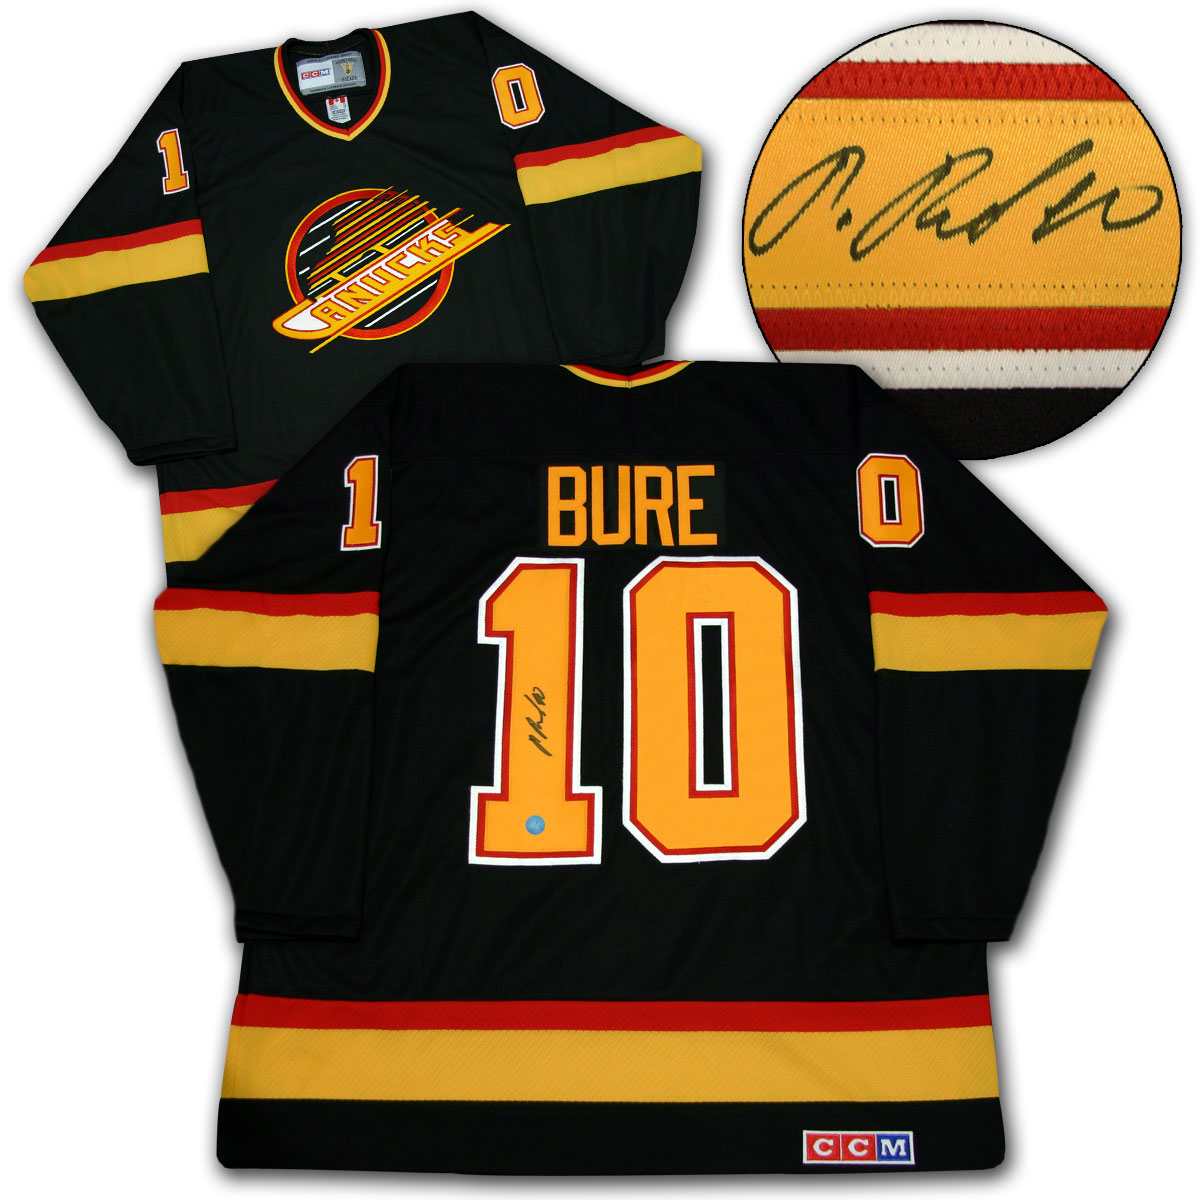 PHG Sports - Vintage Authentic Pro CCM Pavel Bure Vancouver Canucks  Autographed Jersey ! We will be listing some rare jerseys - Keep your eye  on our page for all these amazing